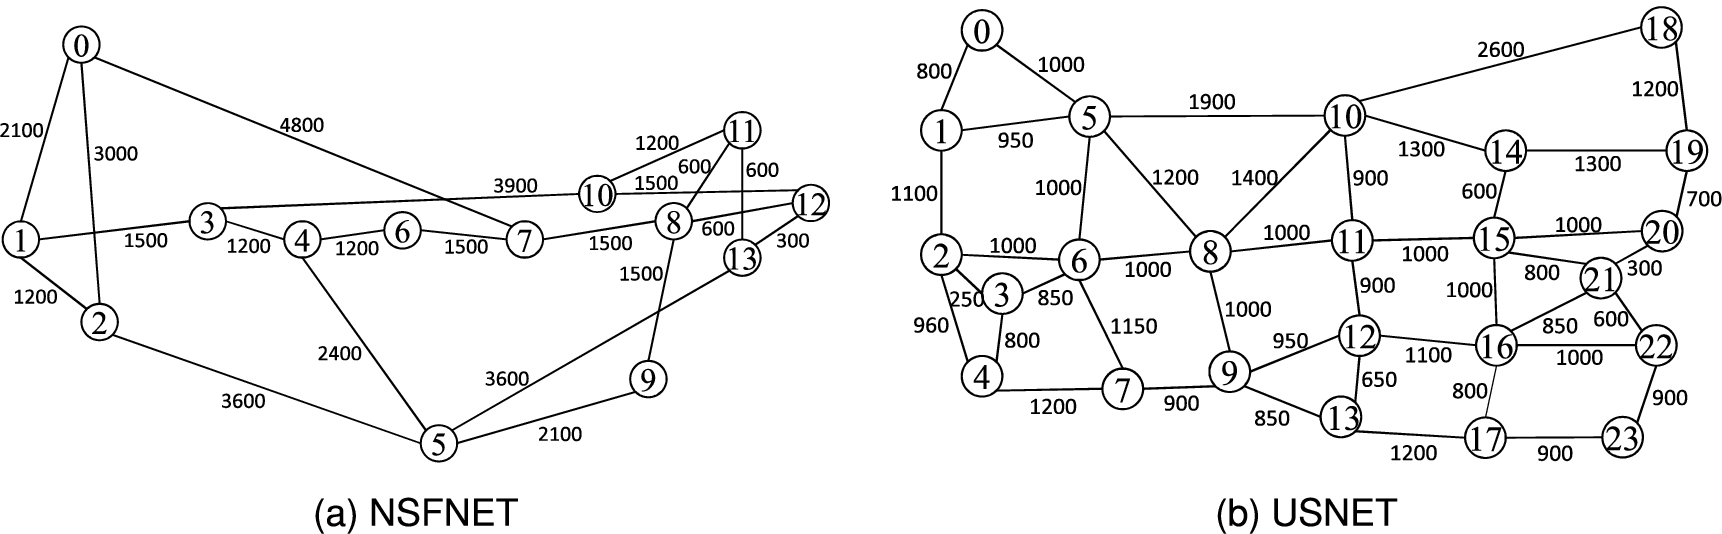 (a) The topology of the 14-node NSFNET with 21 bidirectional links. (b) The topology of the 24-node USNET with 43 bidirectional links.